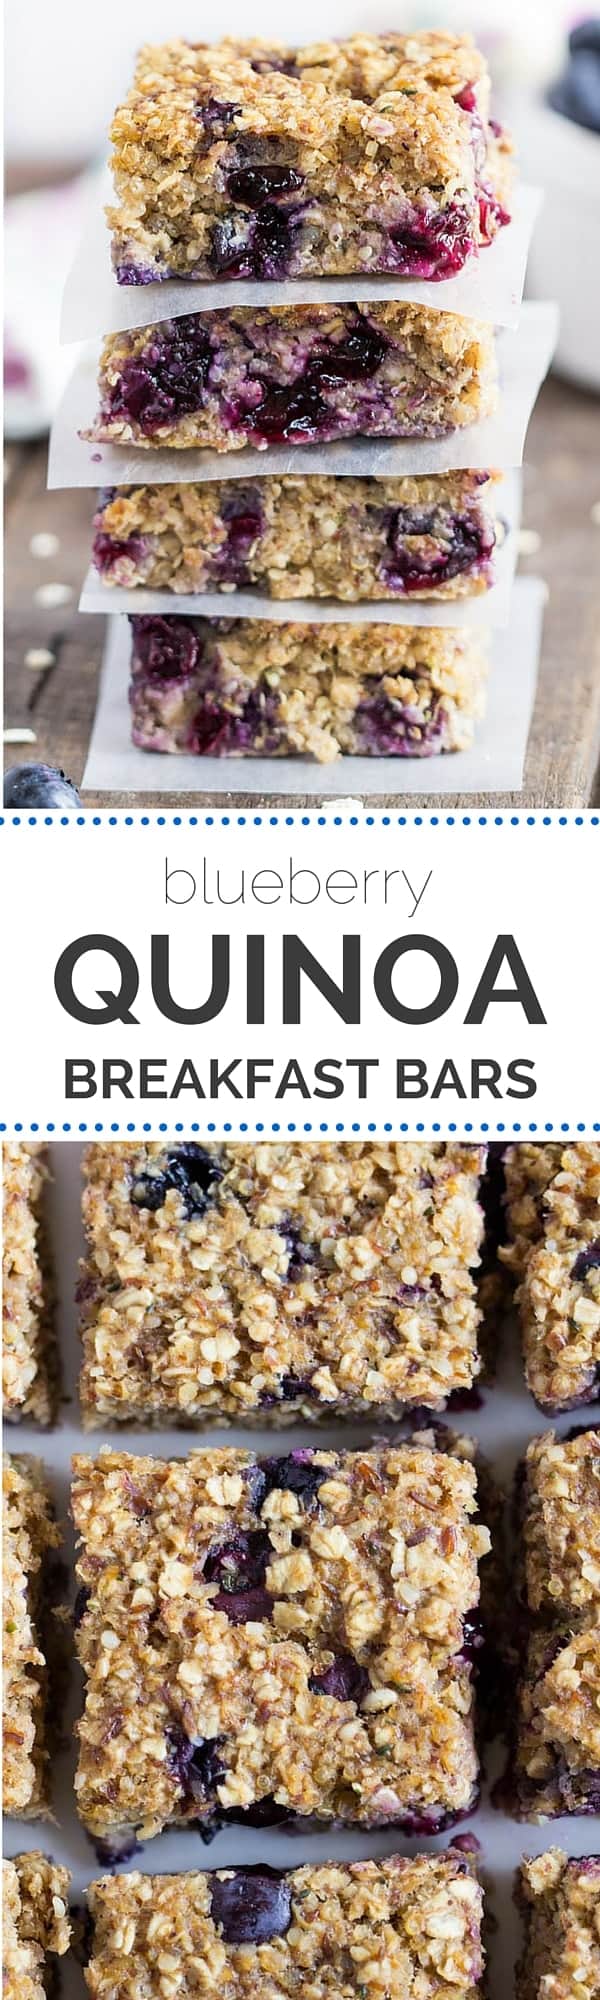 Blueberry Quinoa Breakfast Bars--they're full of fresh, juicy blueberries, with a hint of tangy lemon...and they're vegan!